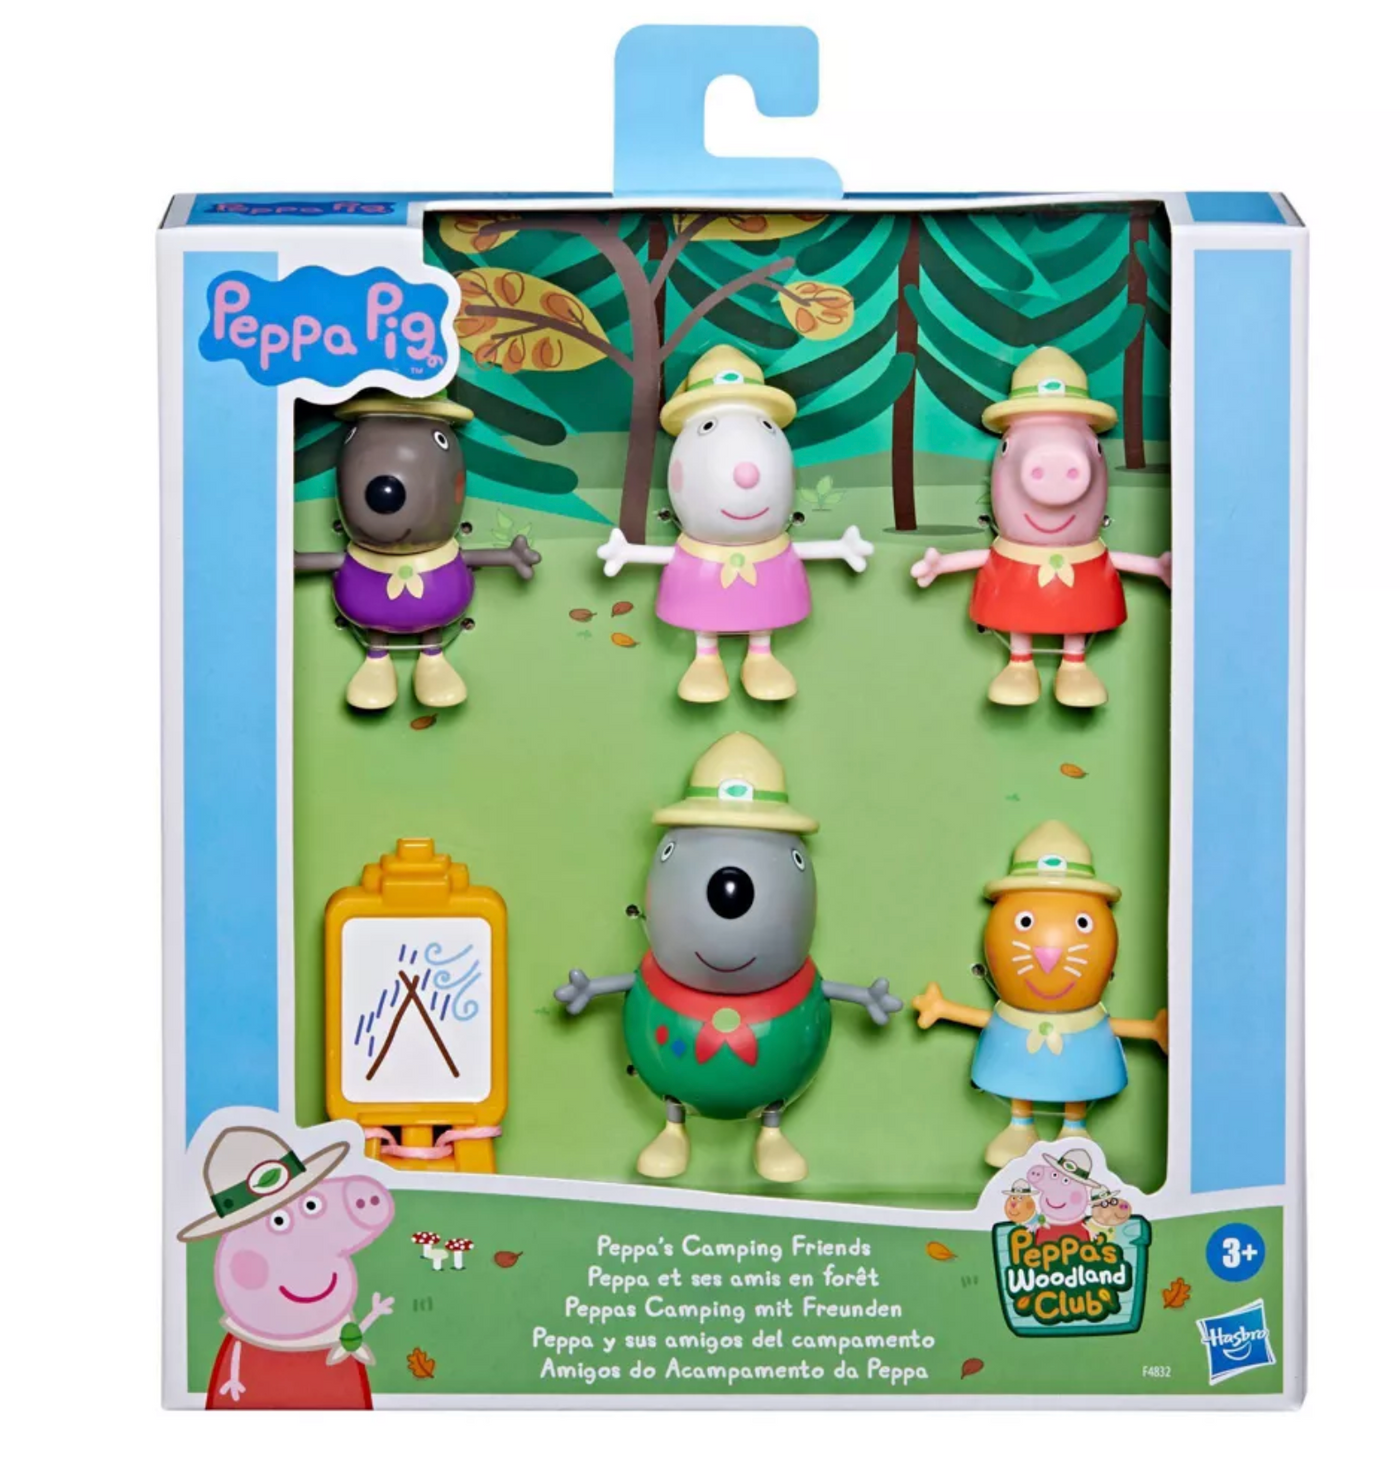 Peppa Pig Mini Camping Friends Mini Figures Target Exclusive New with Box